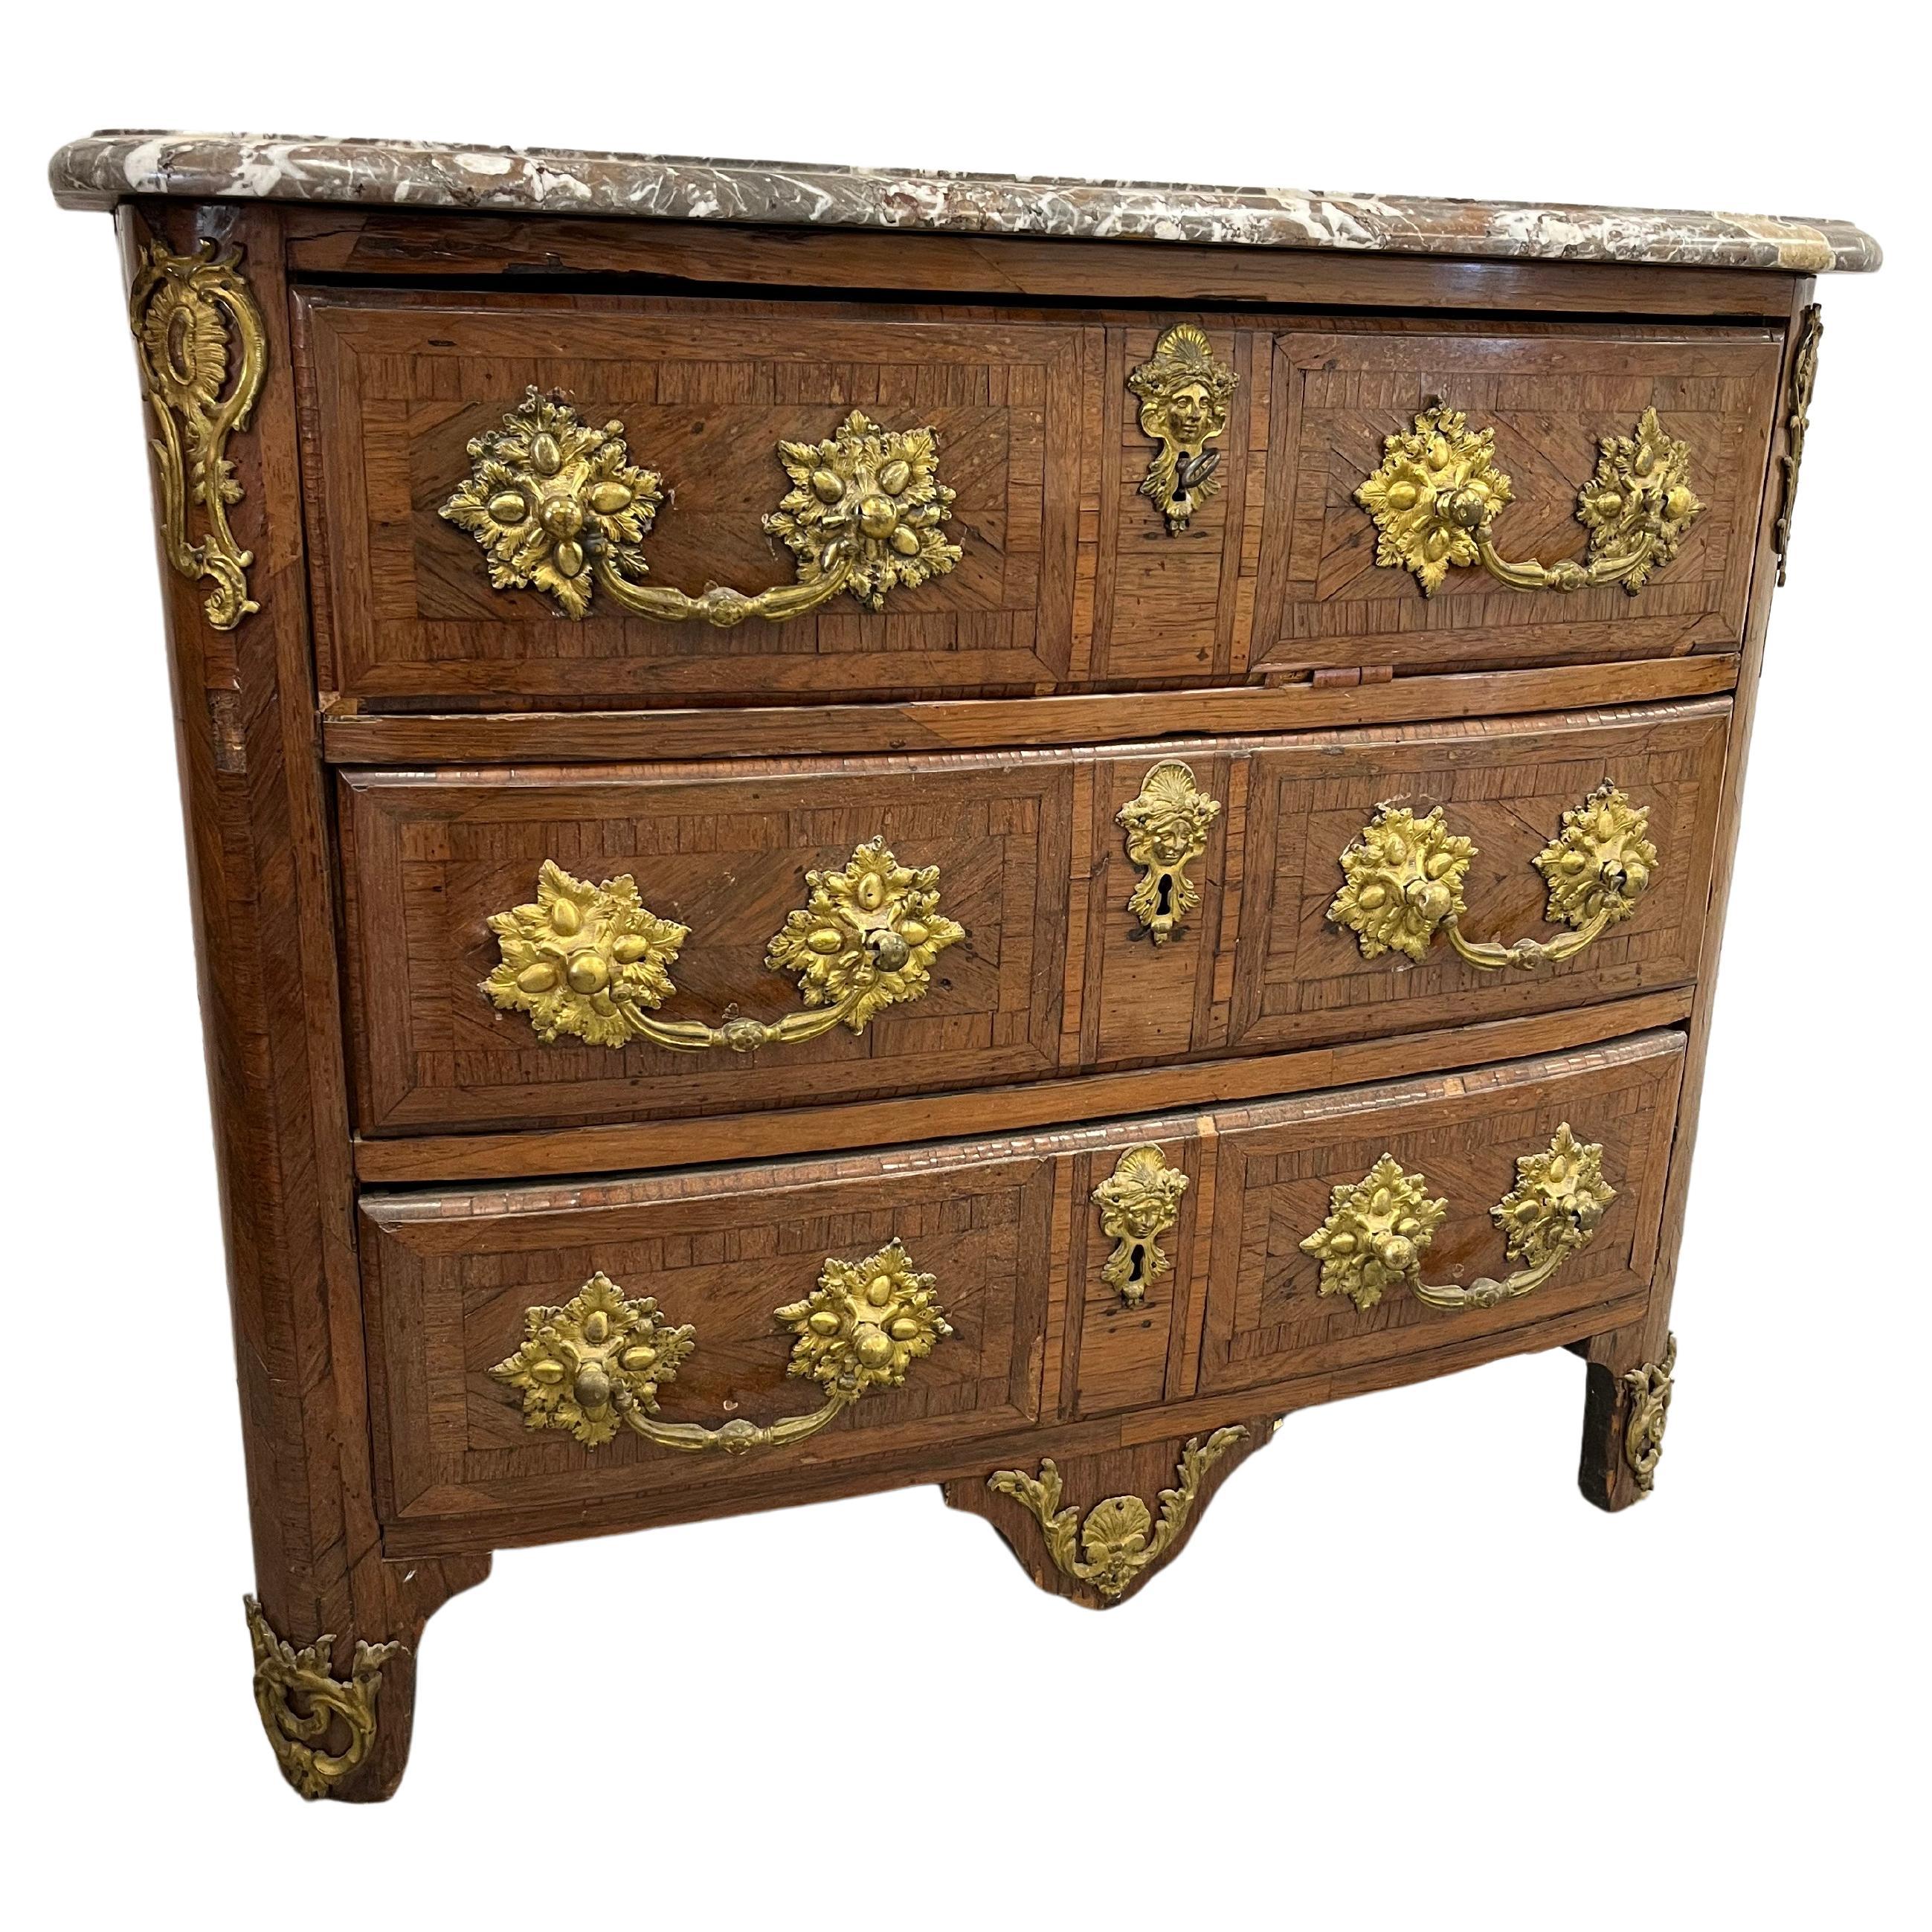 18th Cent French L XIV Commode Marble Top Exotic Wood Veneer original hardwares For Sale